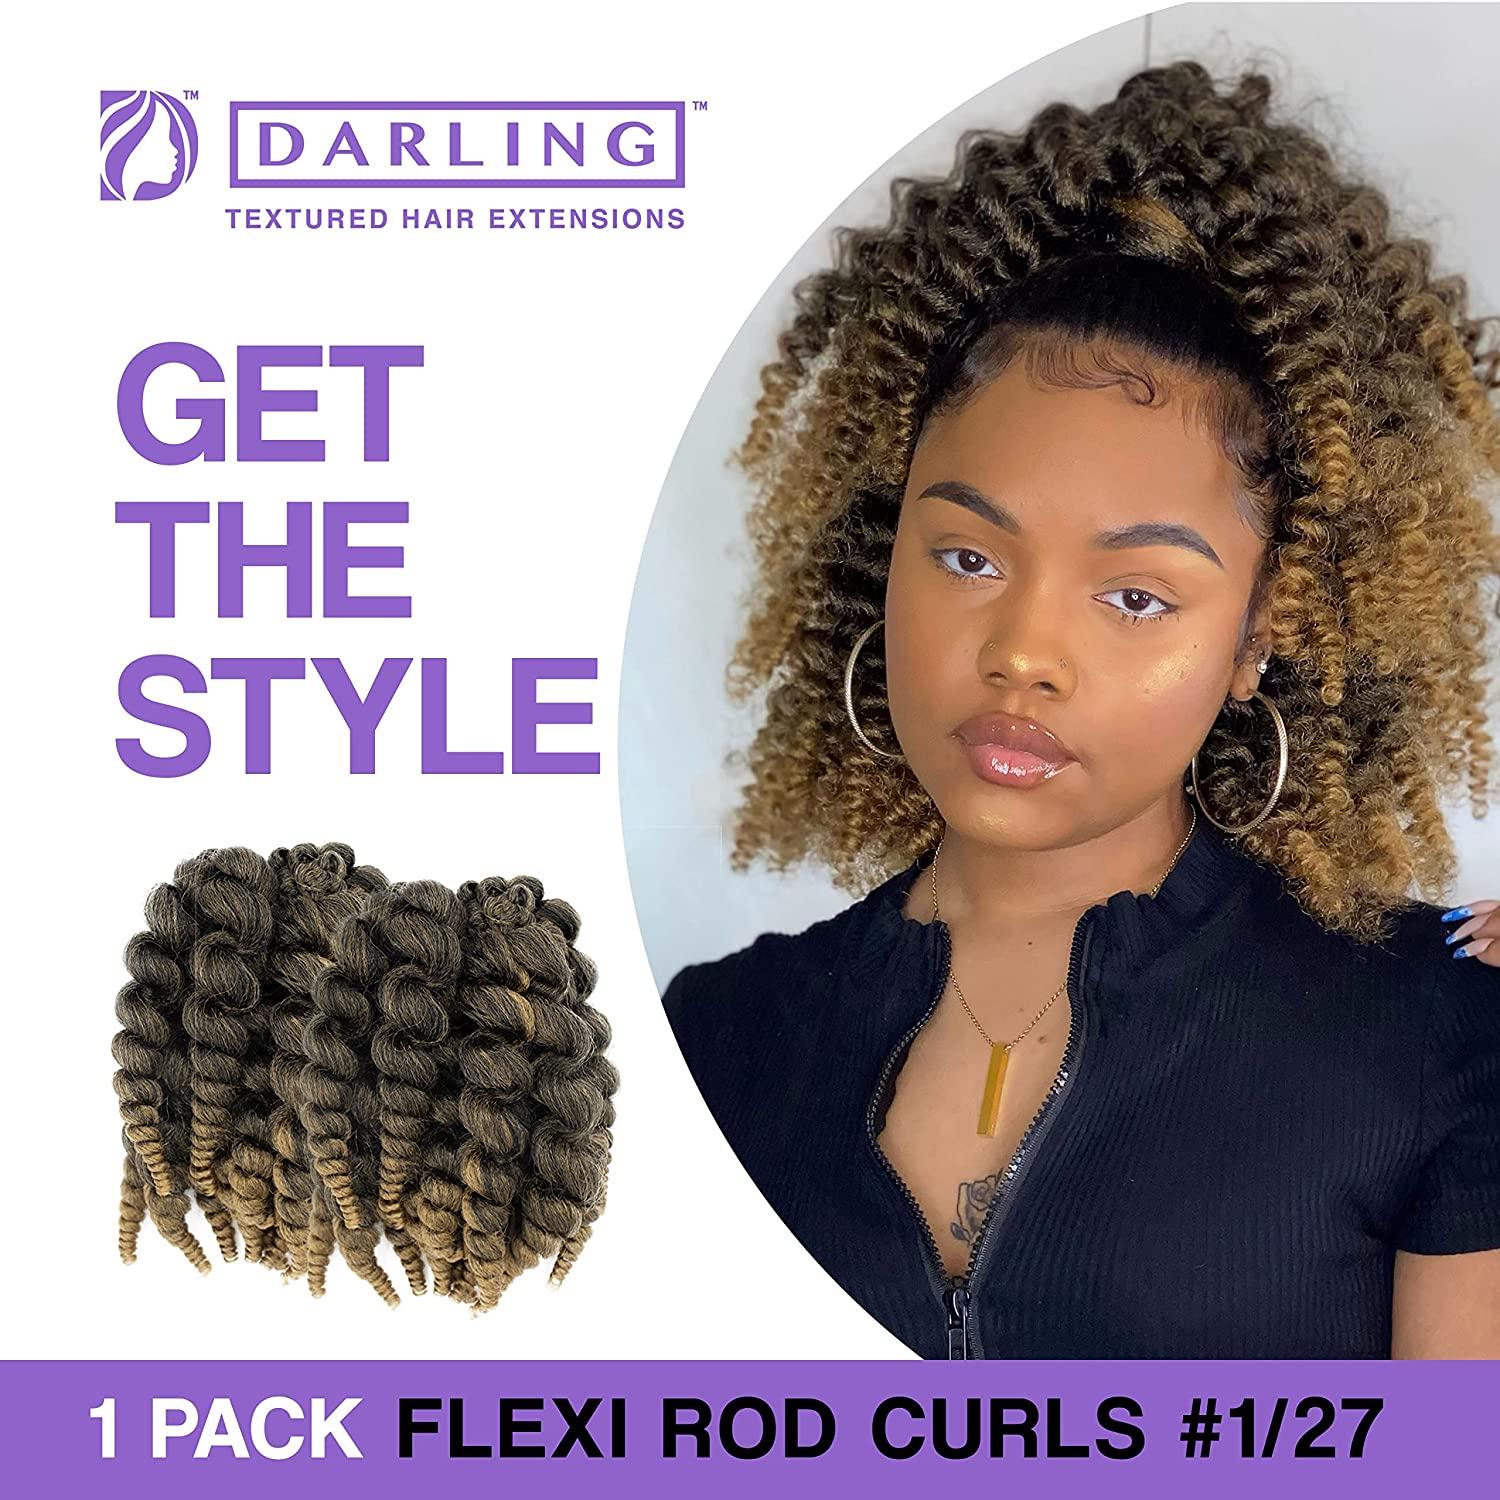 Darling Flexi Rod Curls 6X Crochet Hair Extensions, (3 packs of 2x per  pack) , Natural & Soft Texture, Fluffy Wand Curl, 14 Inch, #1/27 14 Inch  (Pack of 3) #1/27